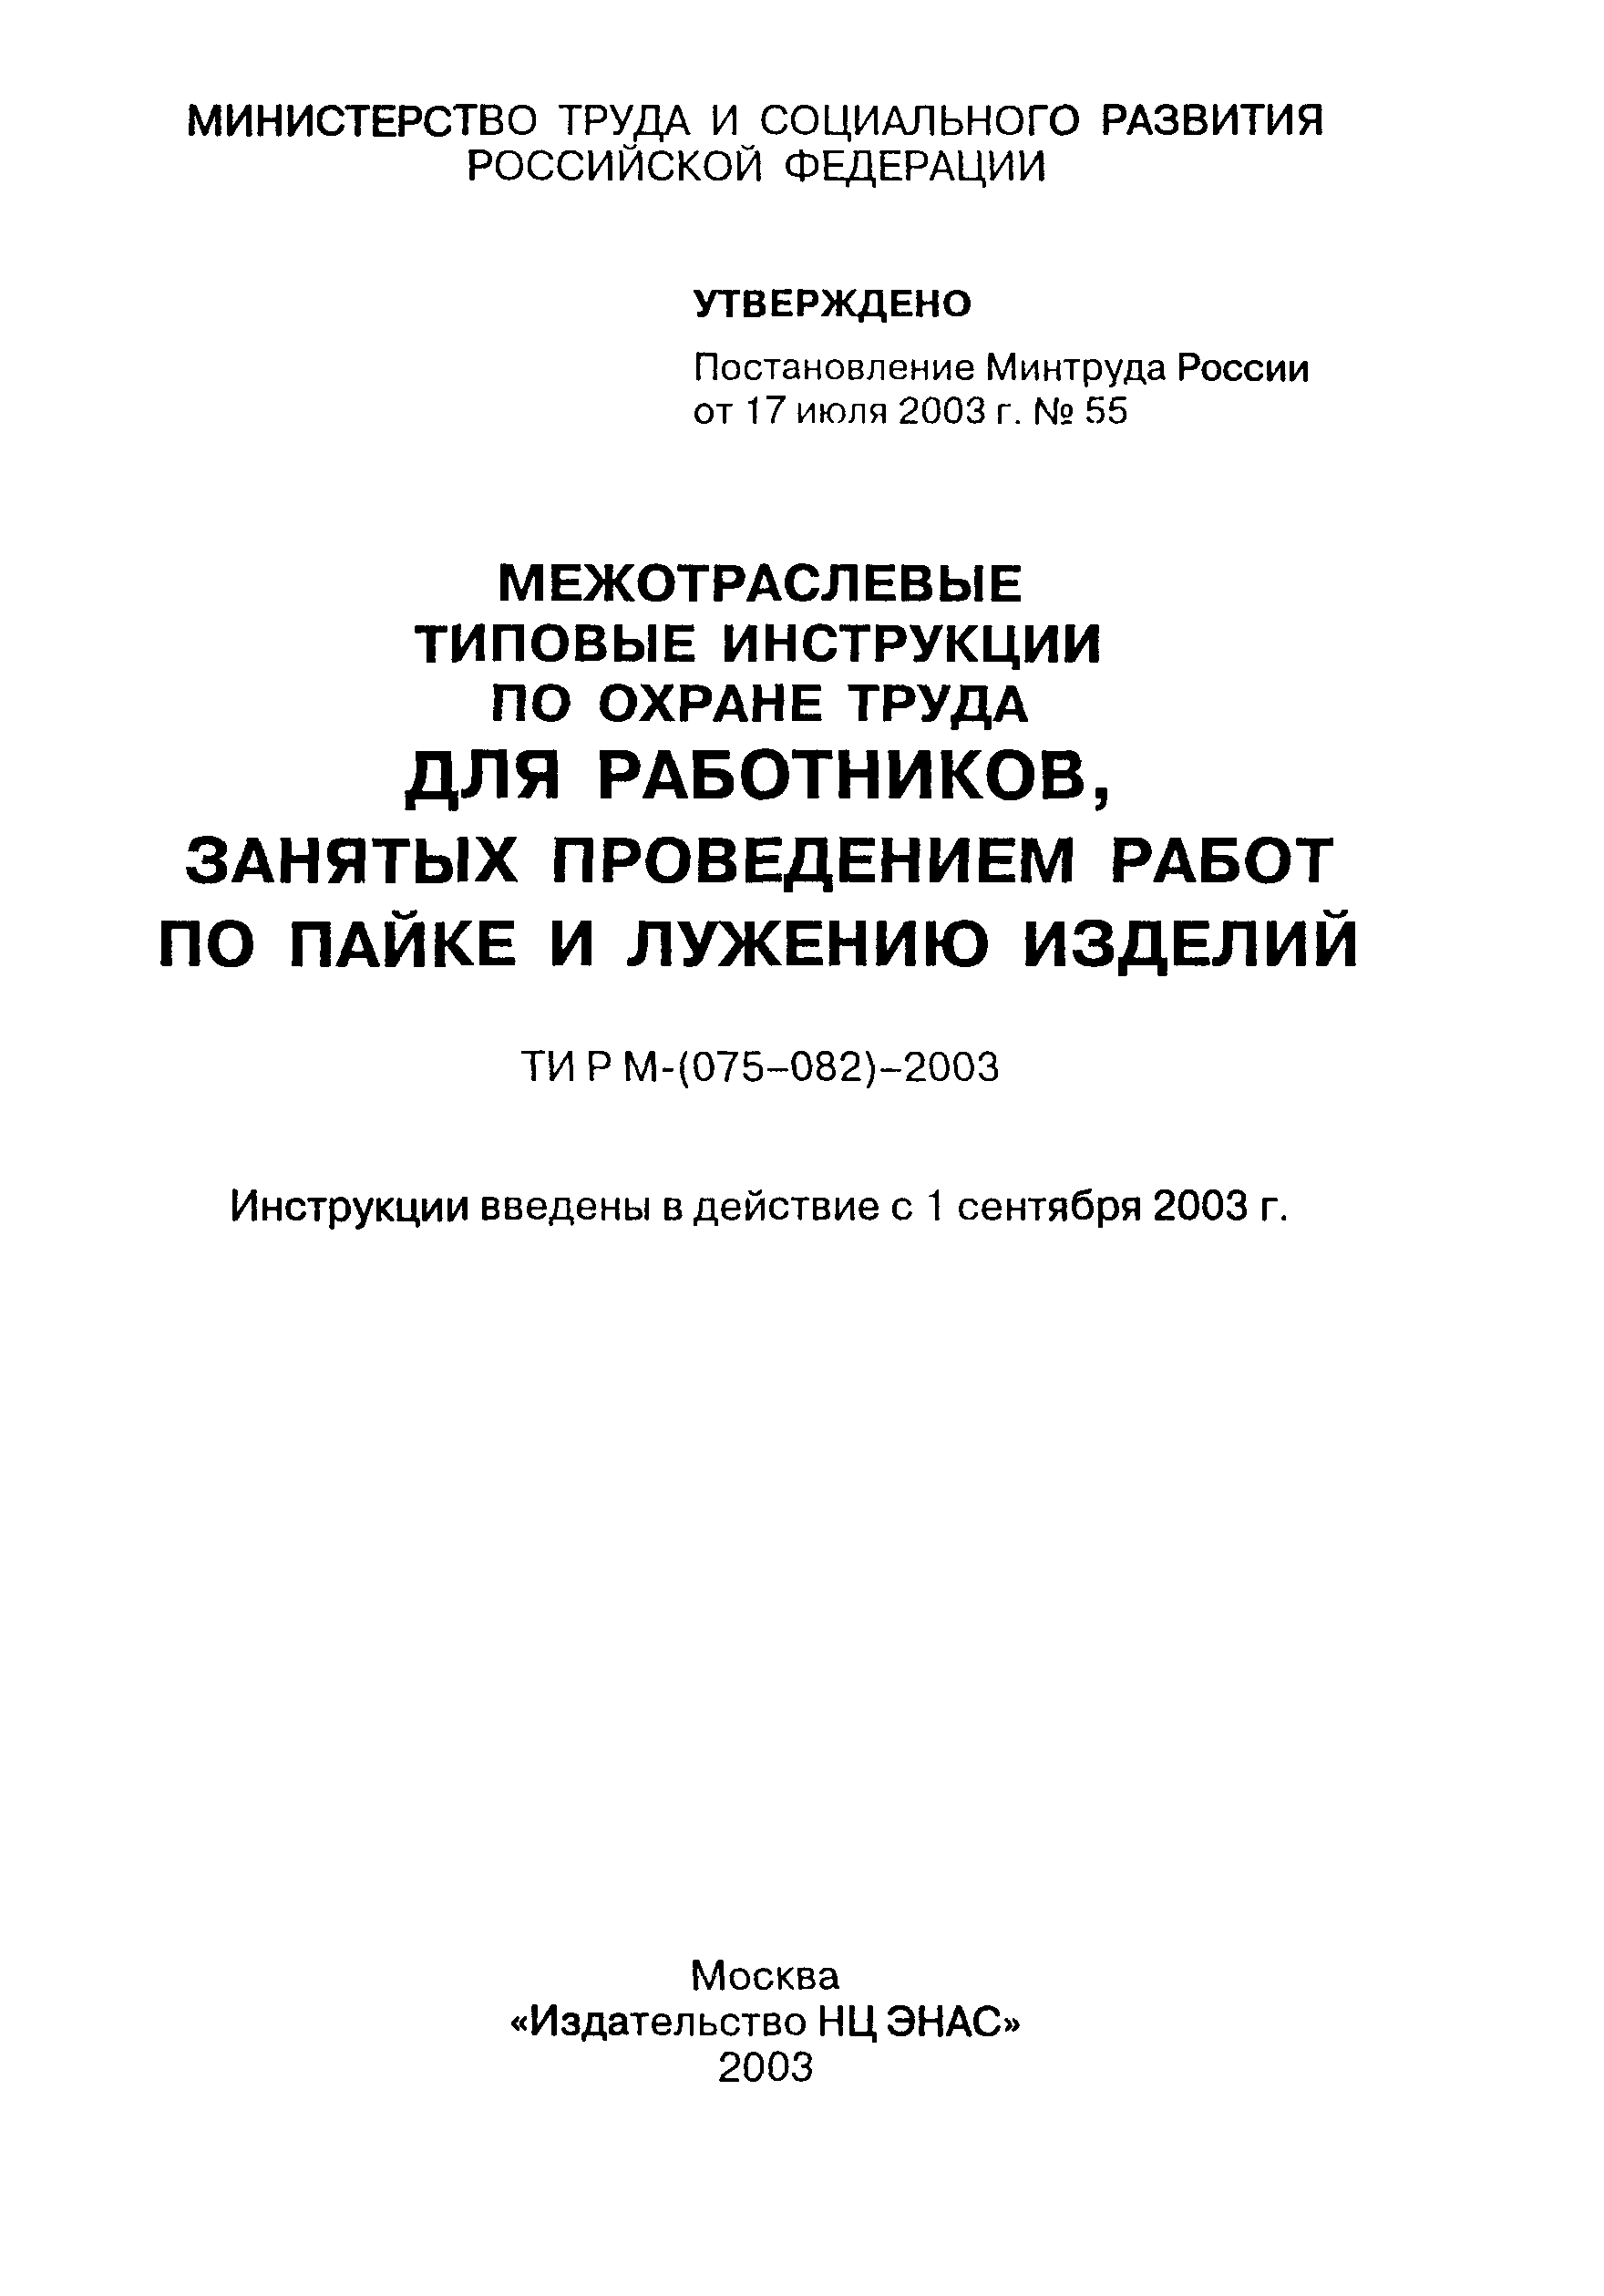 ТИ Р М-077-2003